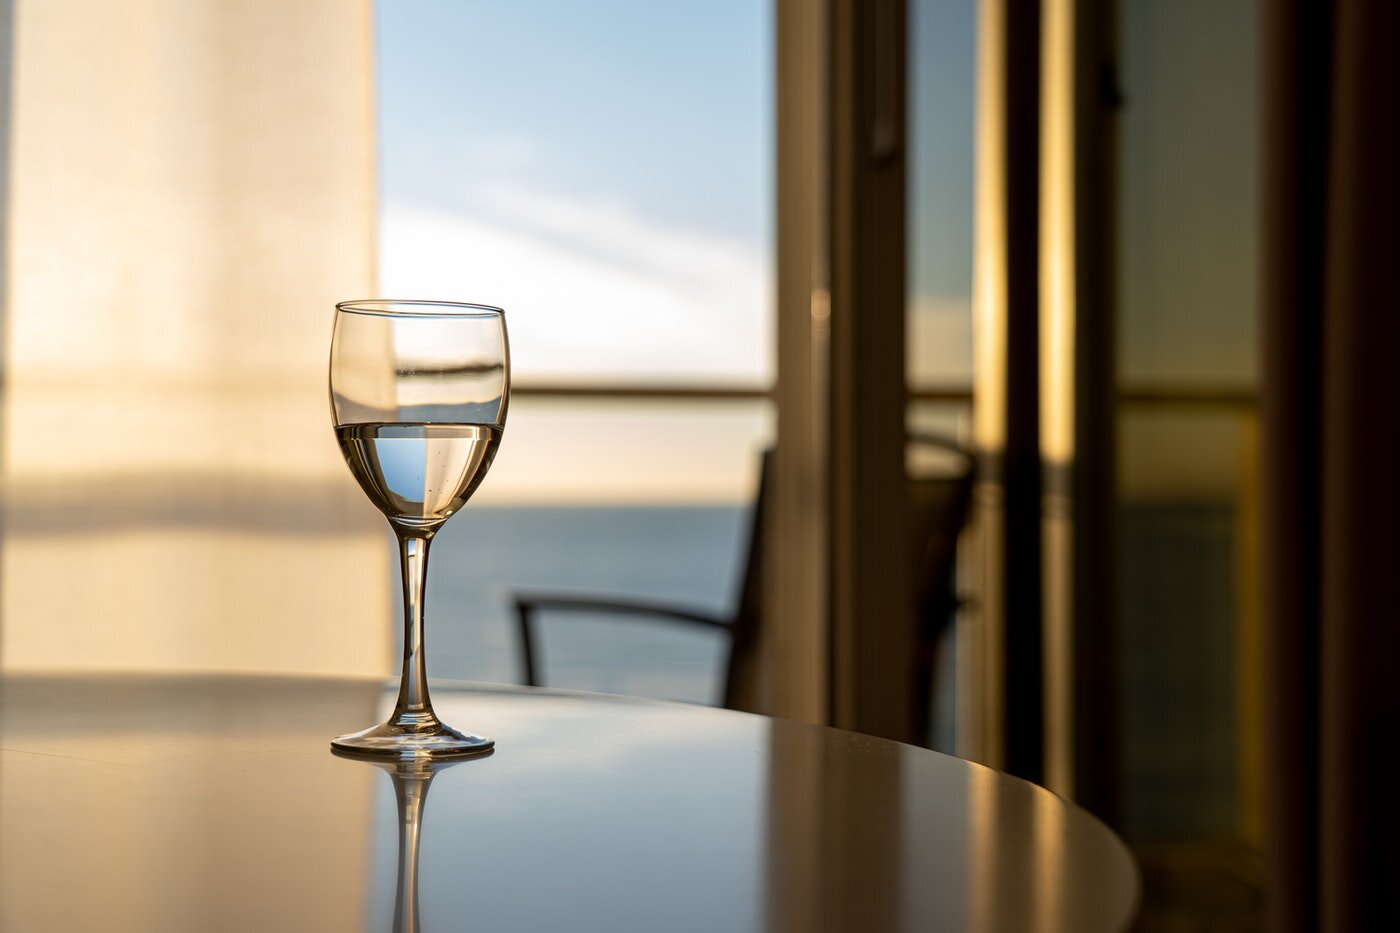 water in wine glass on dining table - how to live green on the go